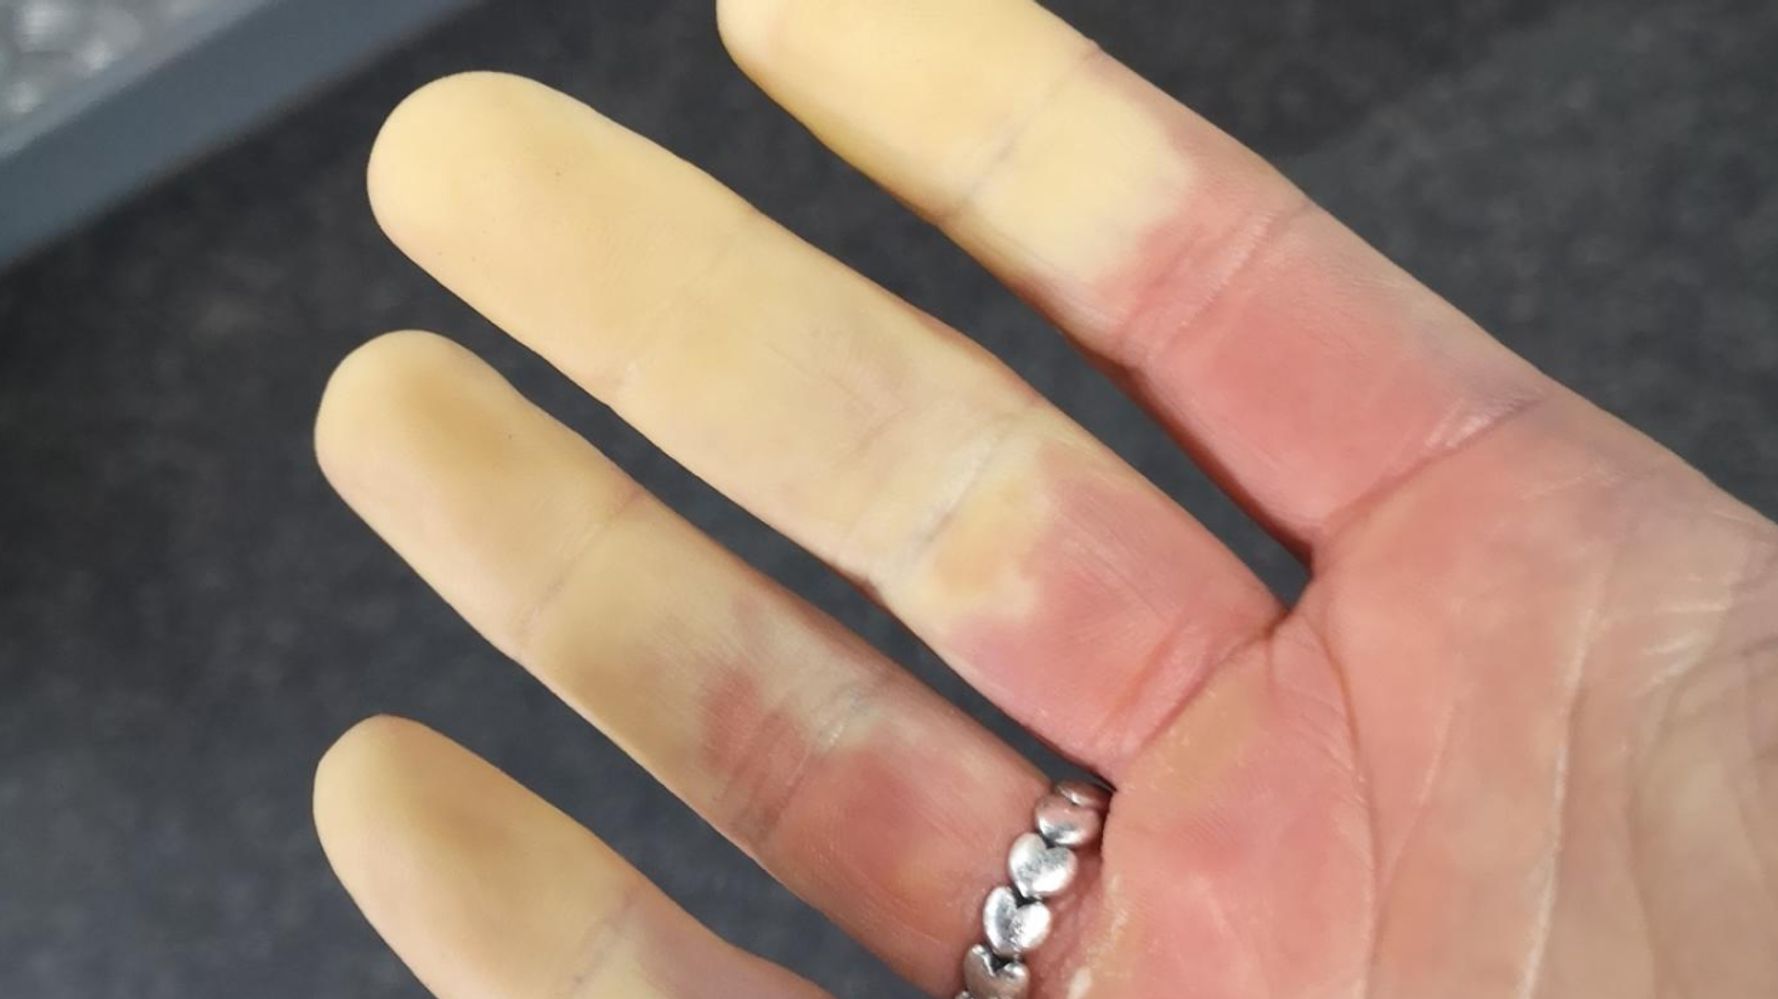 Raynaud's Disease Impacts 1 In 5 People – But Many Have Never Heard Of